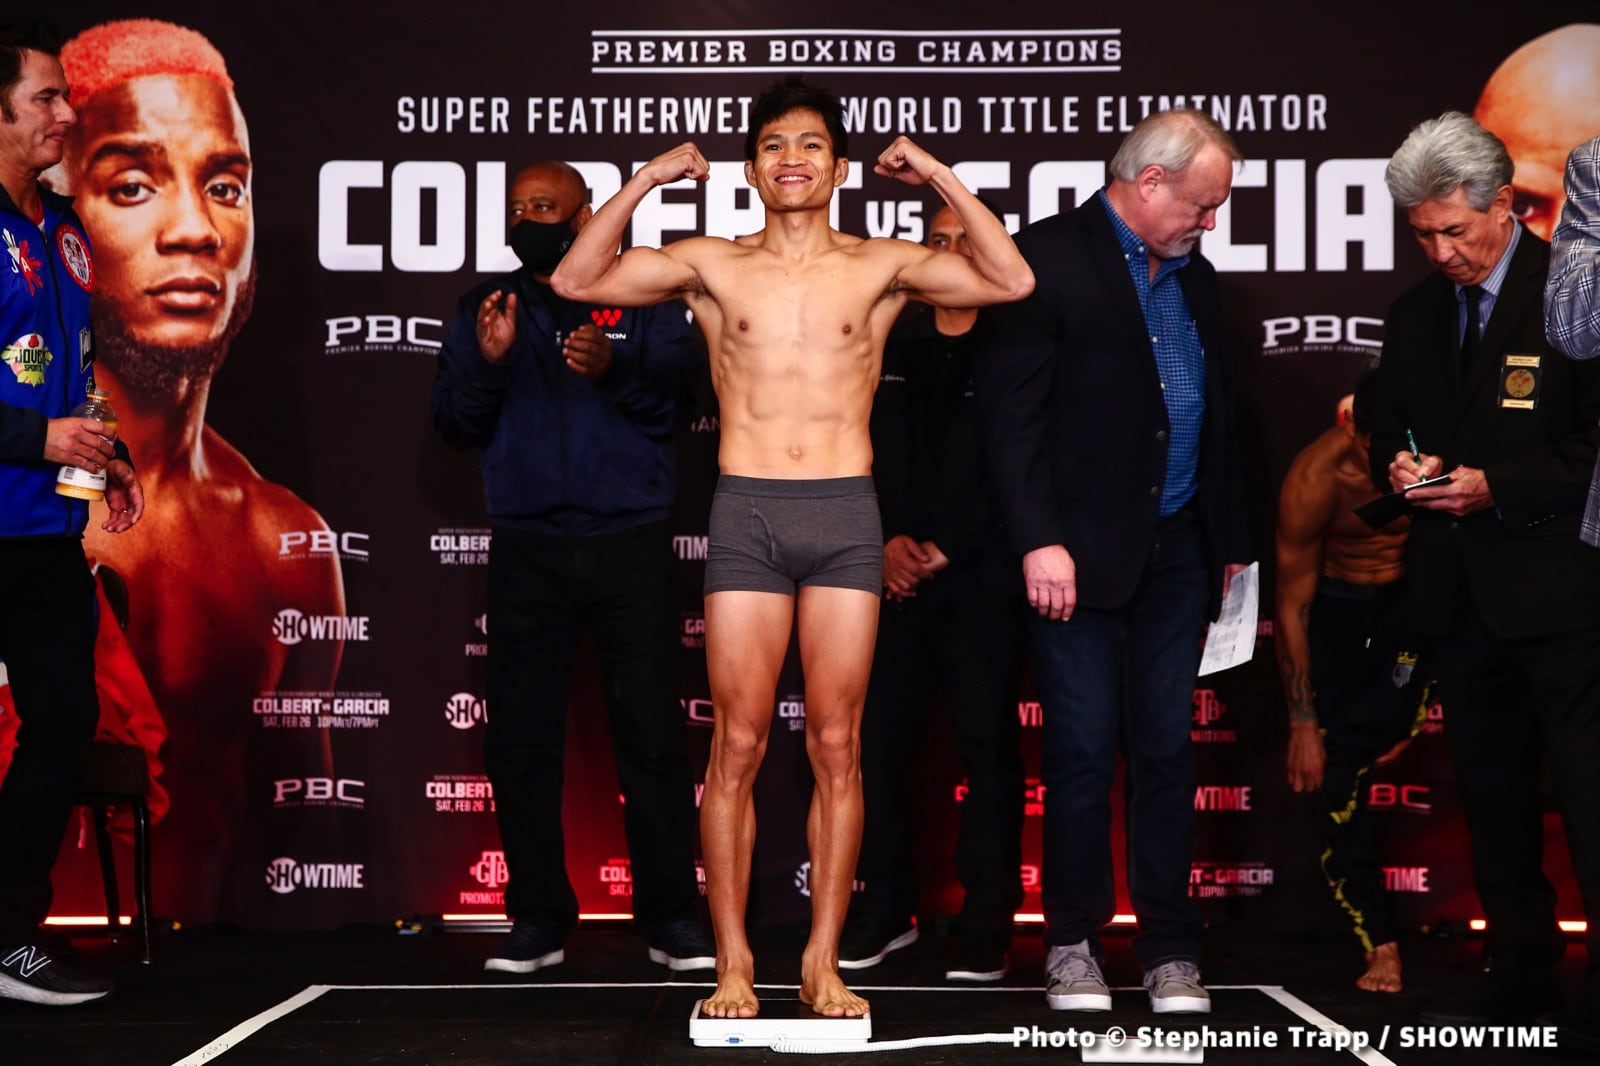 Chris Colbert - Hector Luis Garcia Official Showtime Weigh In Results